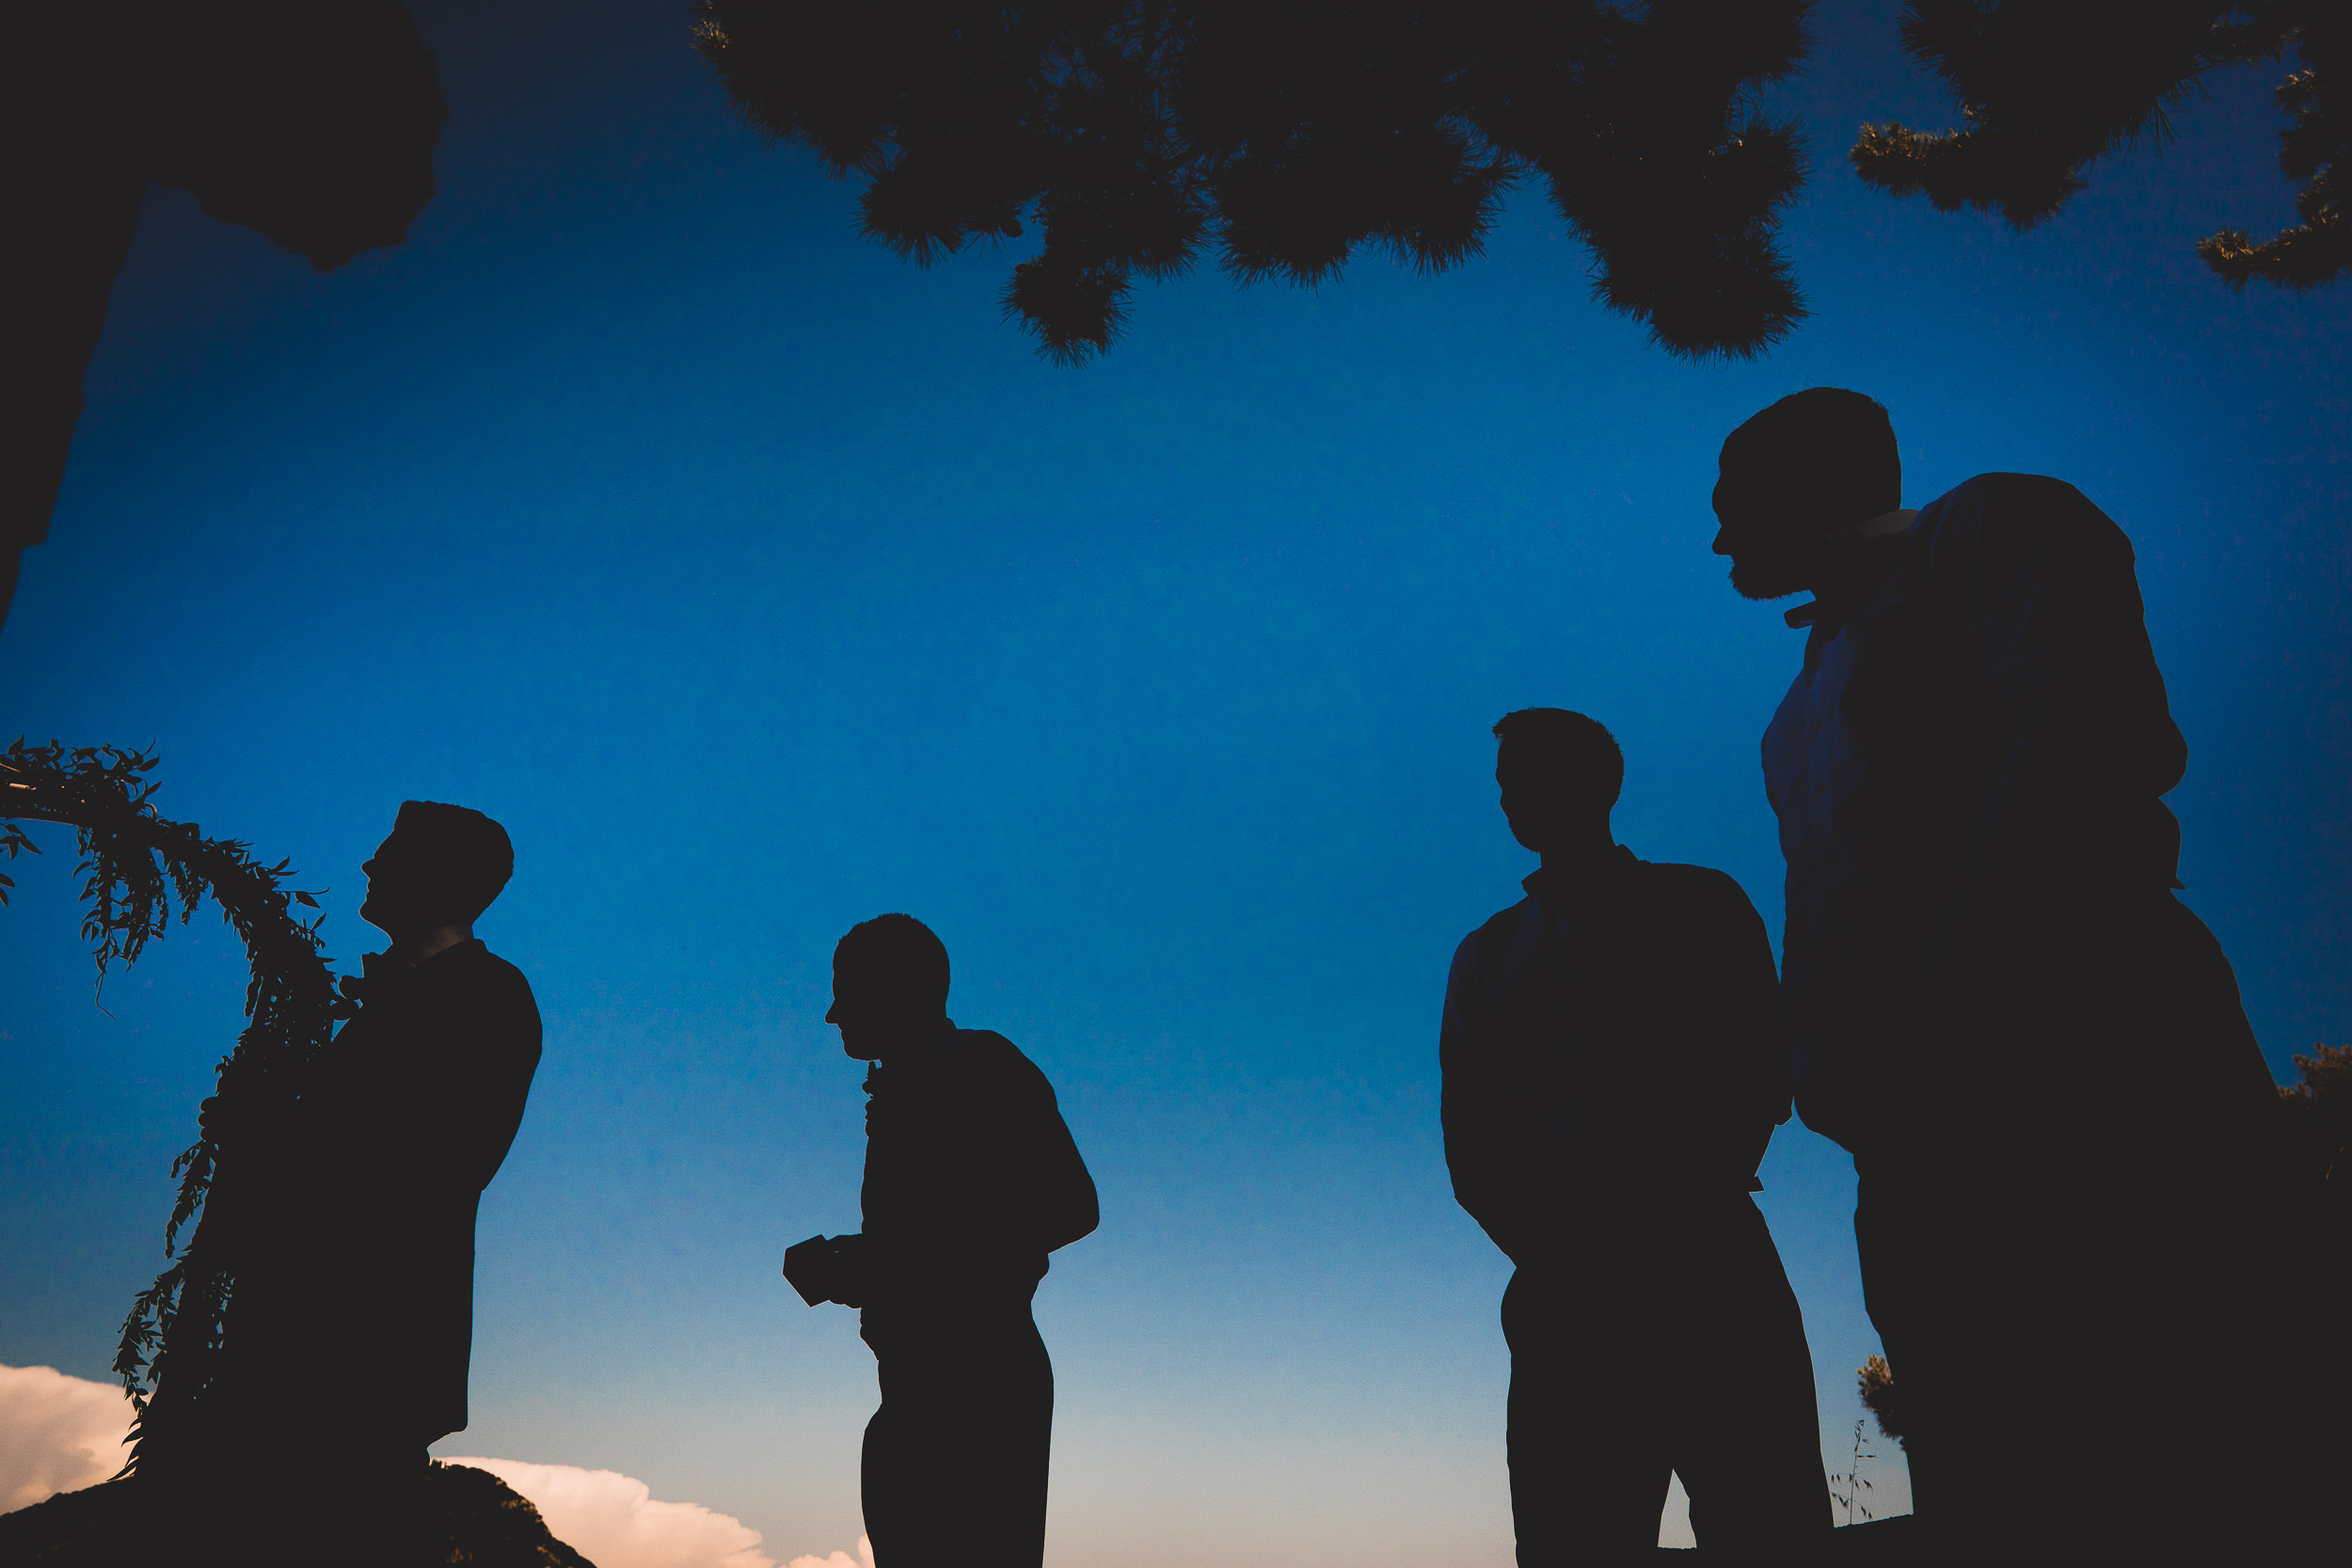 A group of men are silhouetted against a blue sky in a wedding photo.